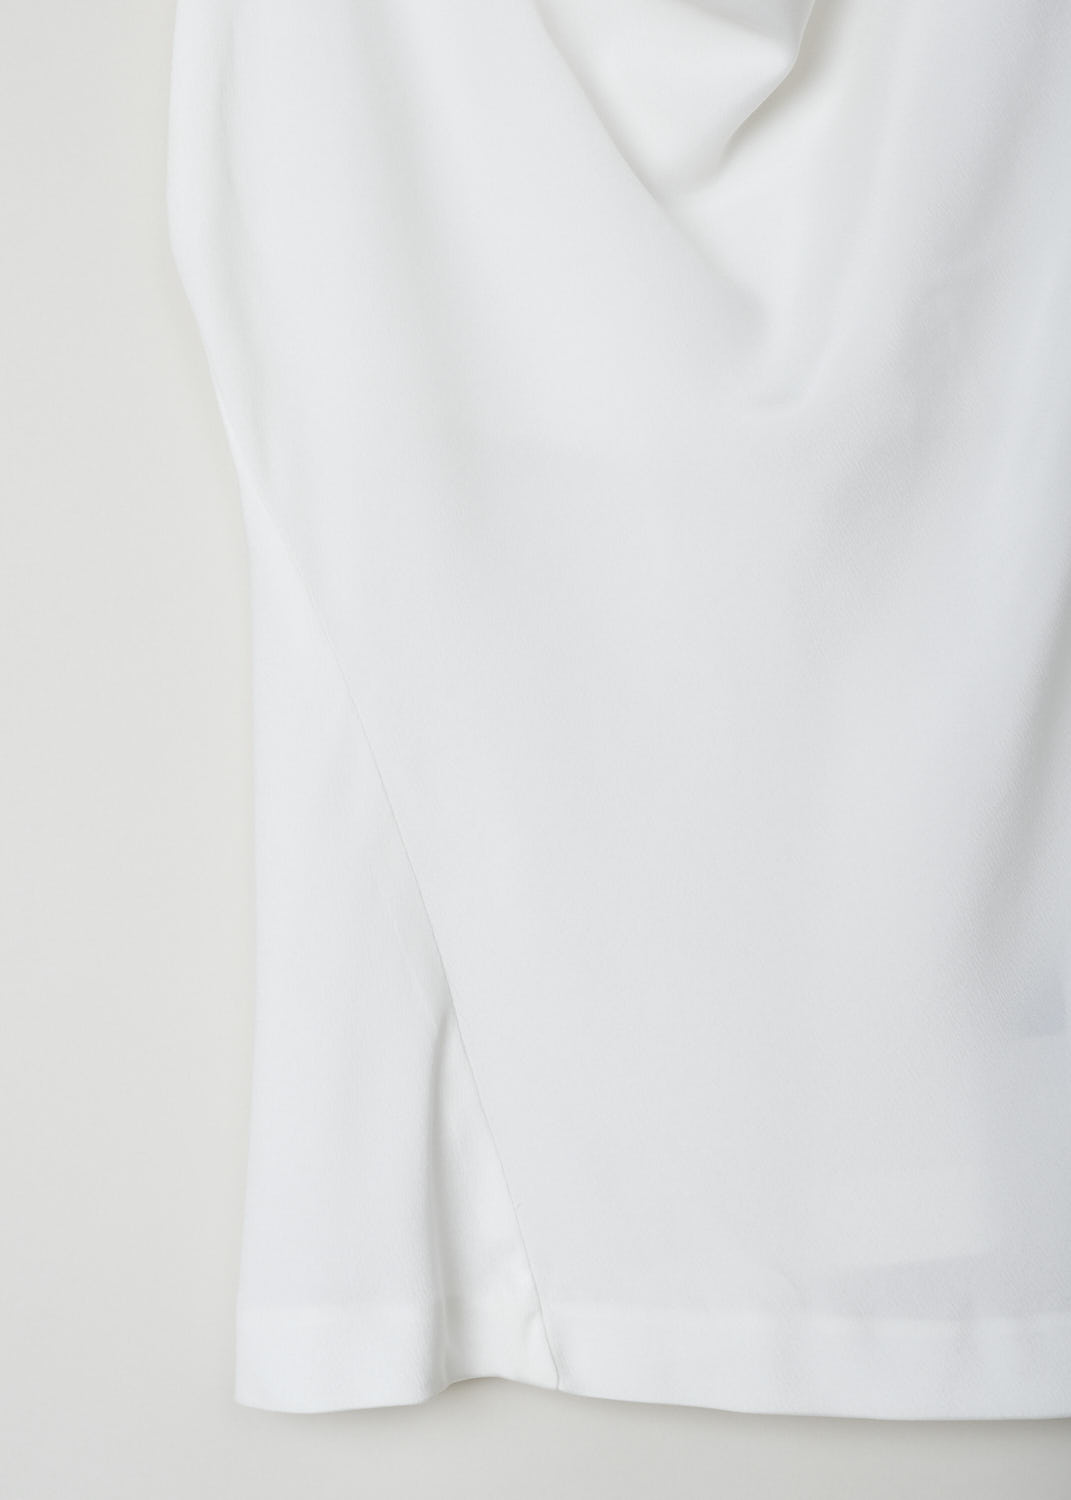 DONNA KARAN, SLEEVELESS COWL NECK TOP, A42T259MB0_132, White, Detail, This white sleeveless top has a cowl neckline. This lightweight garment has a slightly askew seam on one side.
